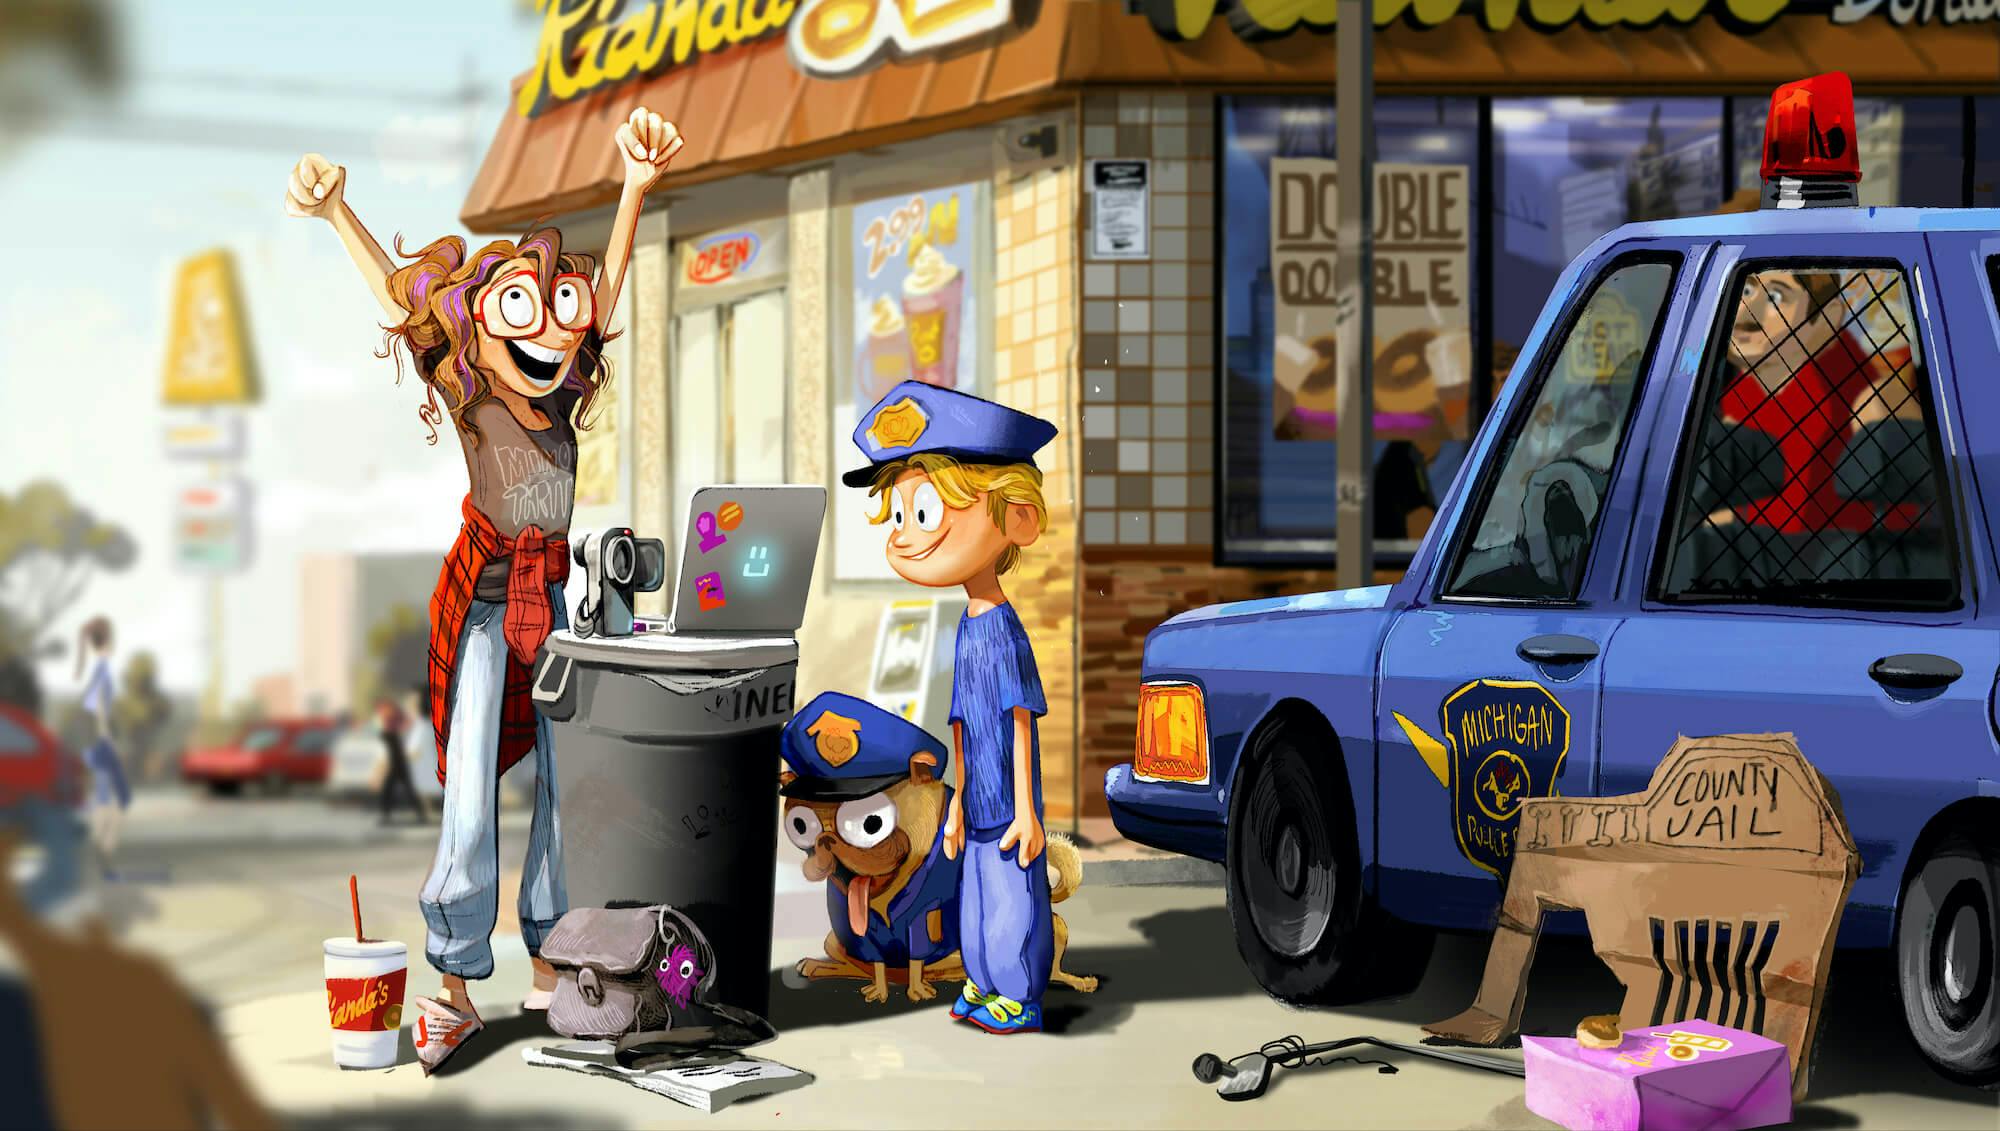 Katie and Aaron stand outside a fast food restaurant looking at Katie’s computer. She raises her fists ecstatically as Aaron and Monchi look on in matching cop outfits. Beside them is a police car (and cardboard imitation counterpart).